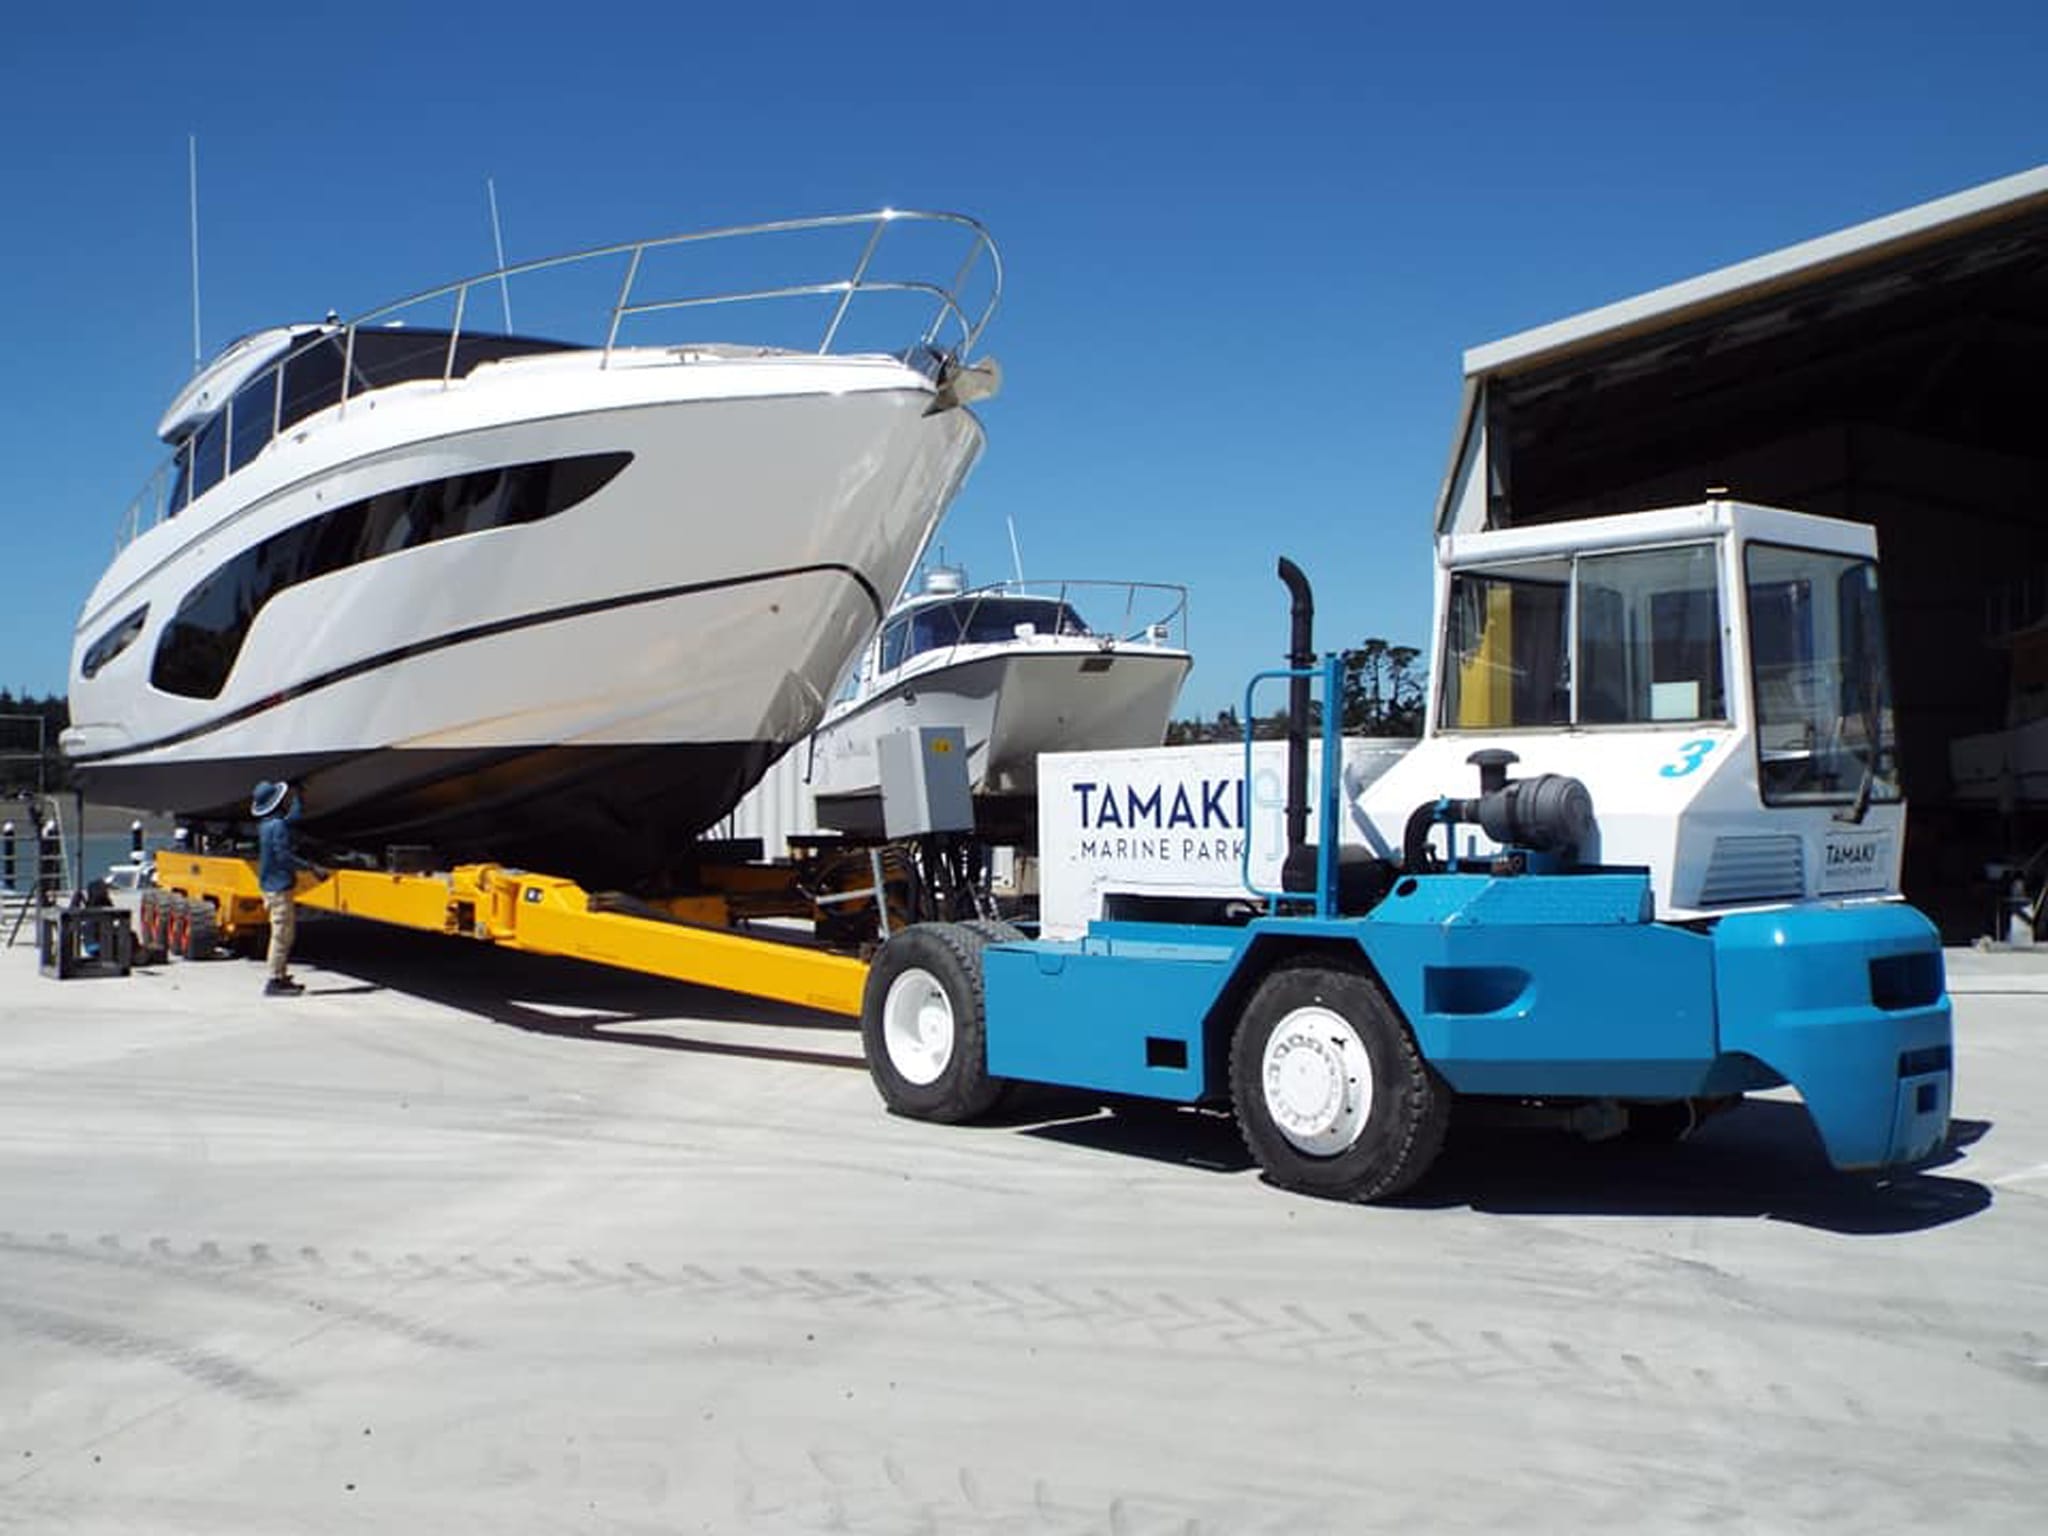 Boat repairers in the Auckland area